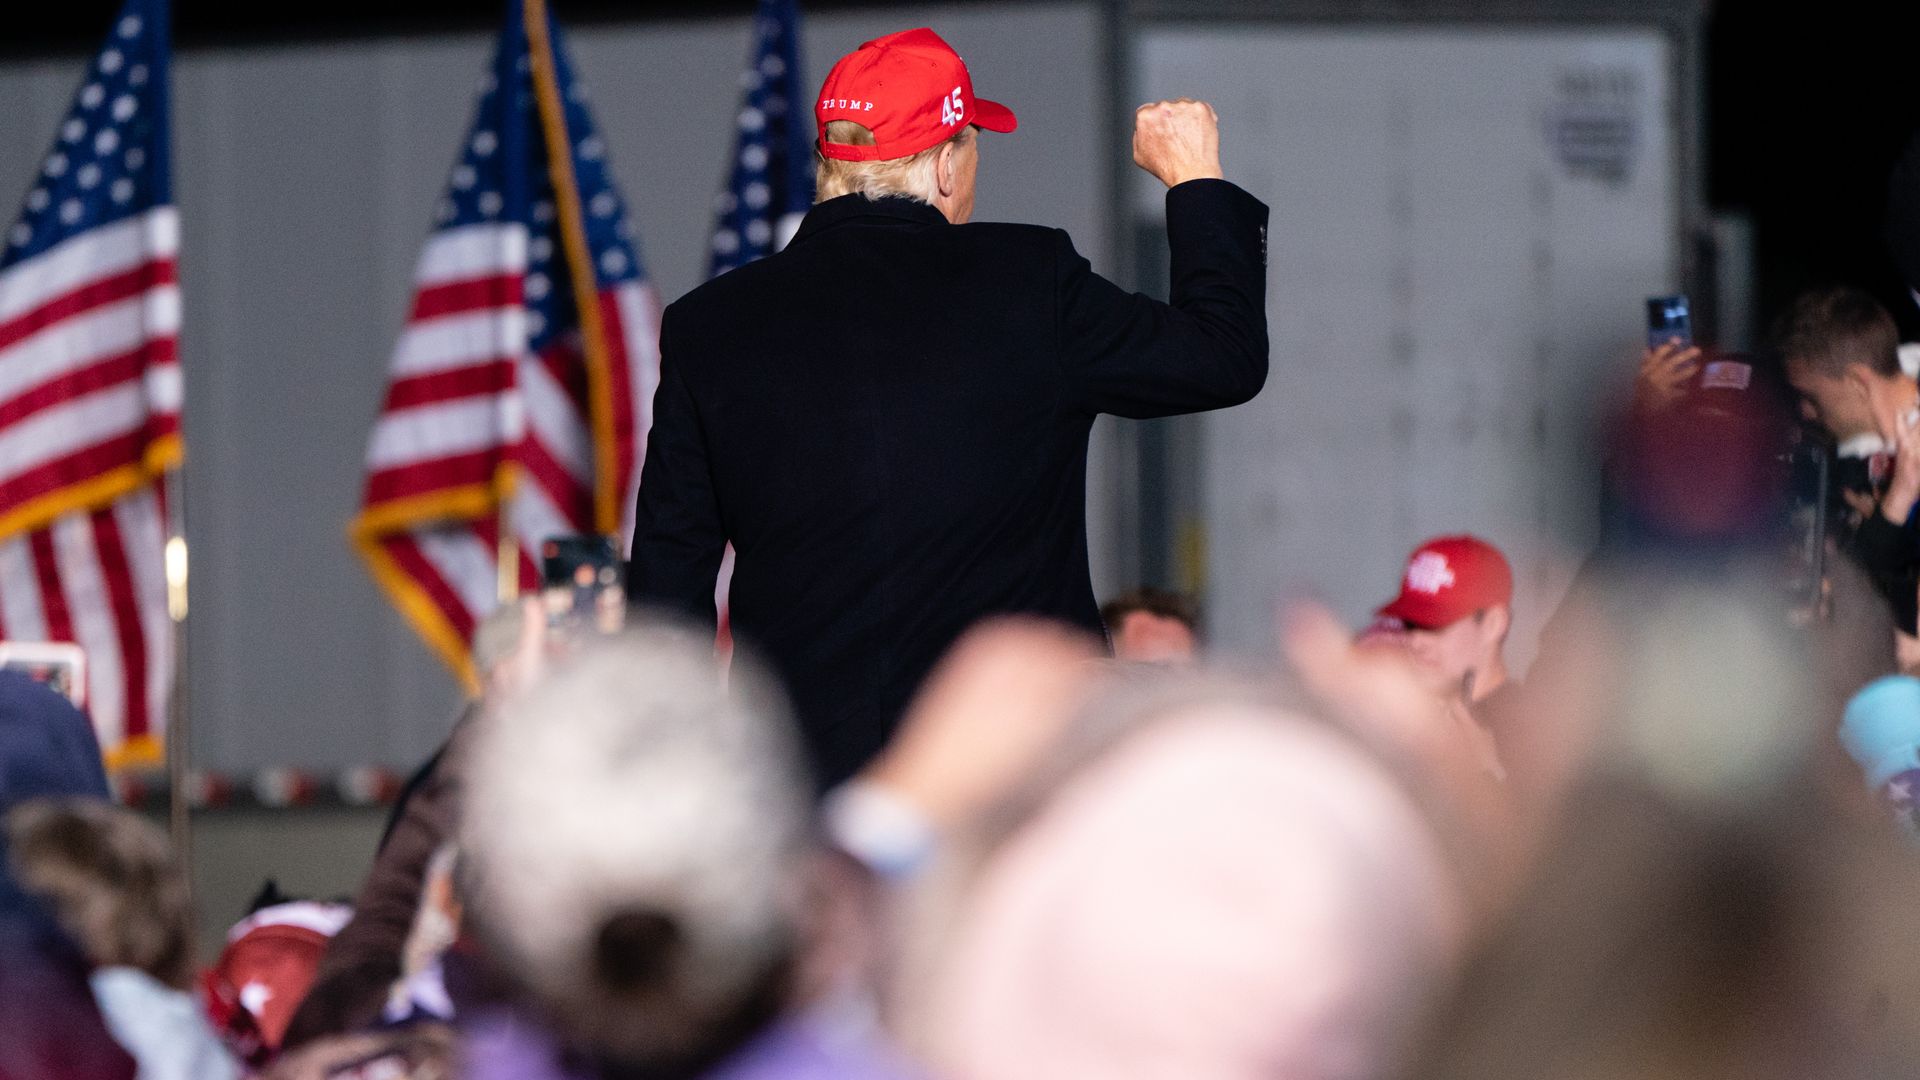 Former President Trump is seen pumping a fist to the crowd after a speech in Georgia on Saturday.